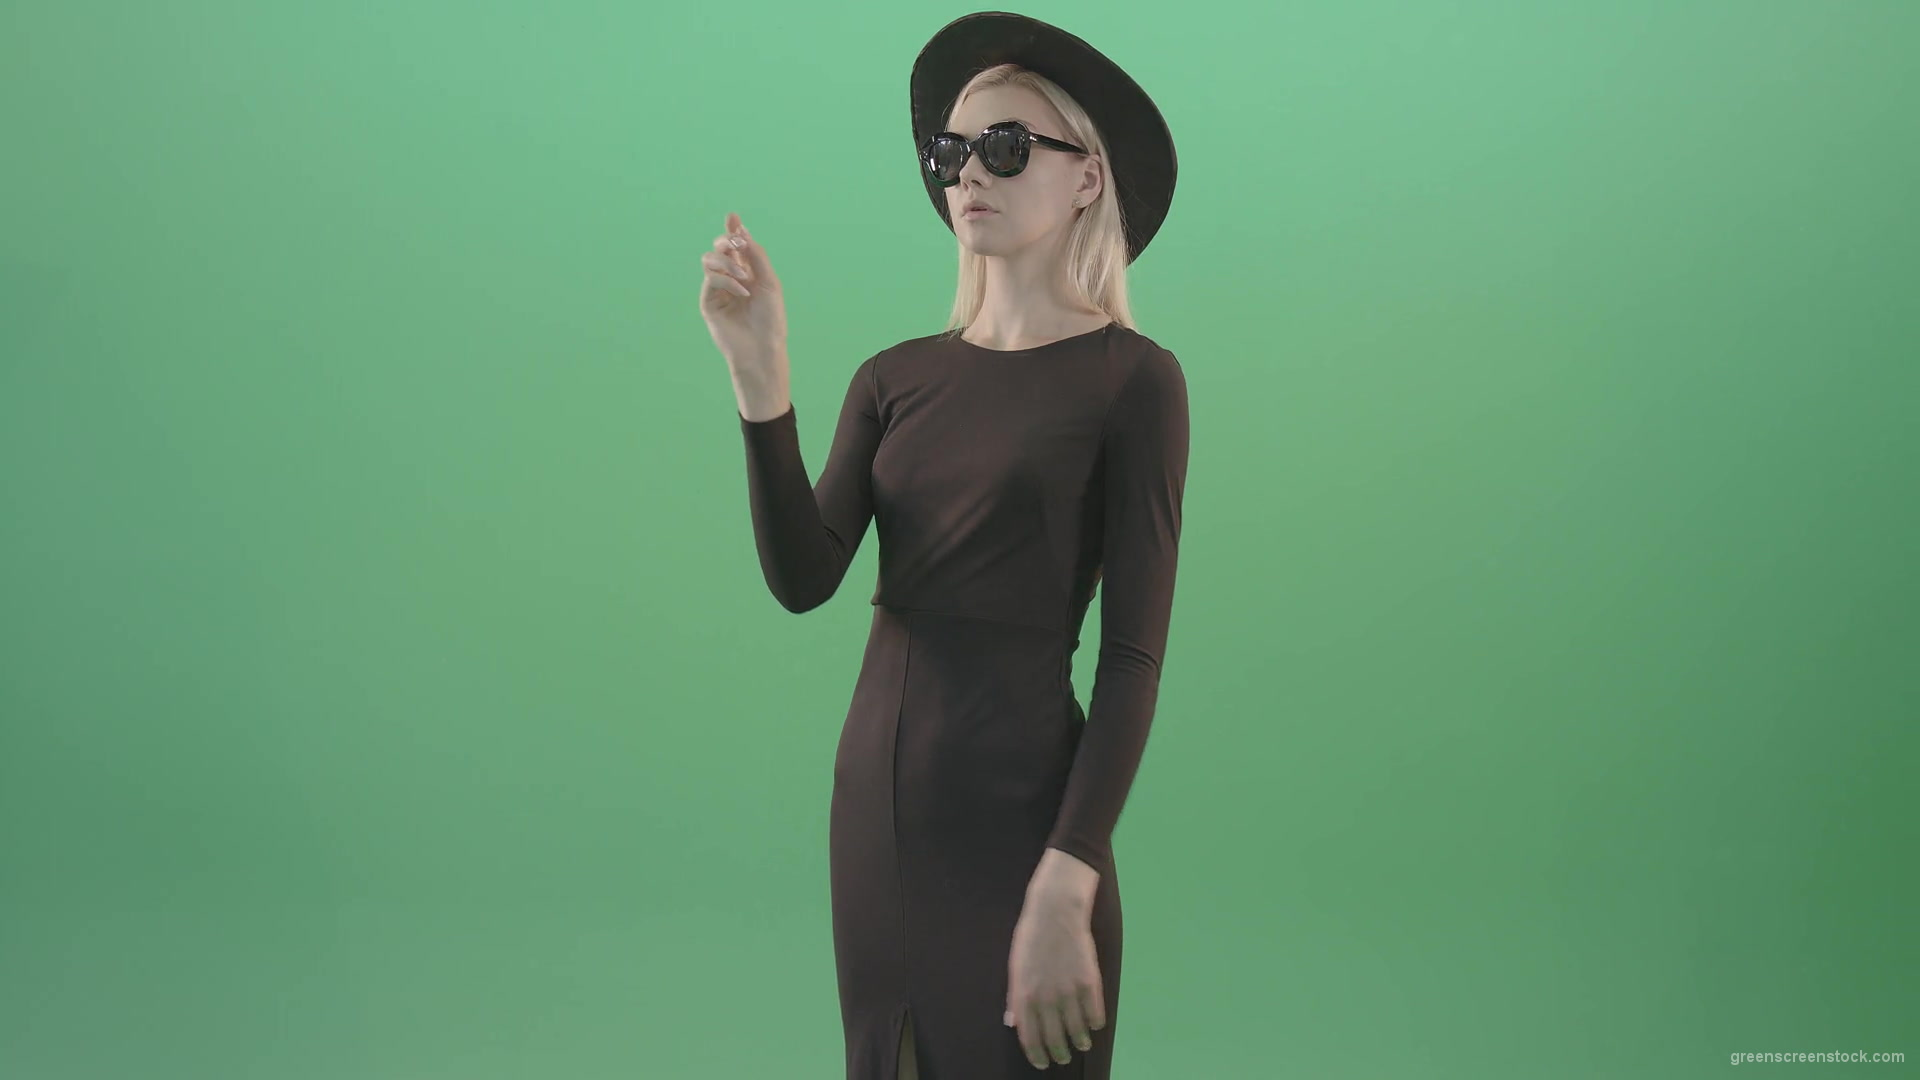 Awesome-beautiful-luxury-women-in-black-dress-shopping-virtual-products-on-touch-screen-4K-Green-Screen-Video-Footage-1920_006 Green Screen Stock